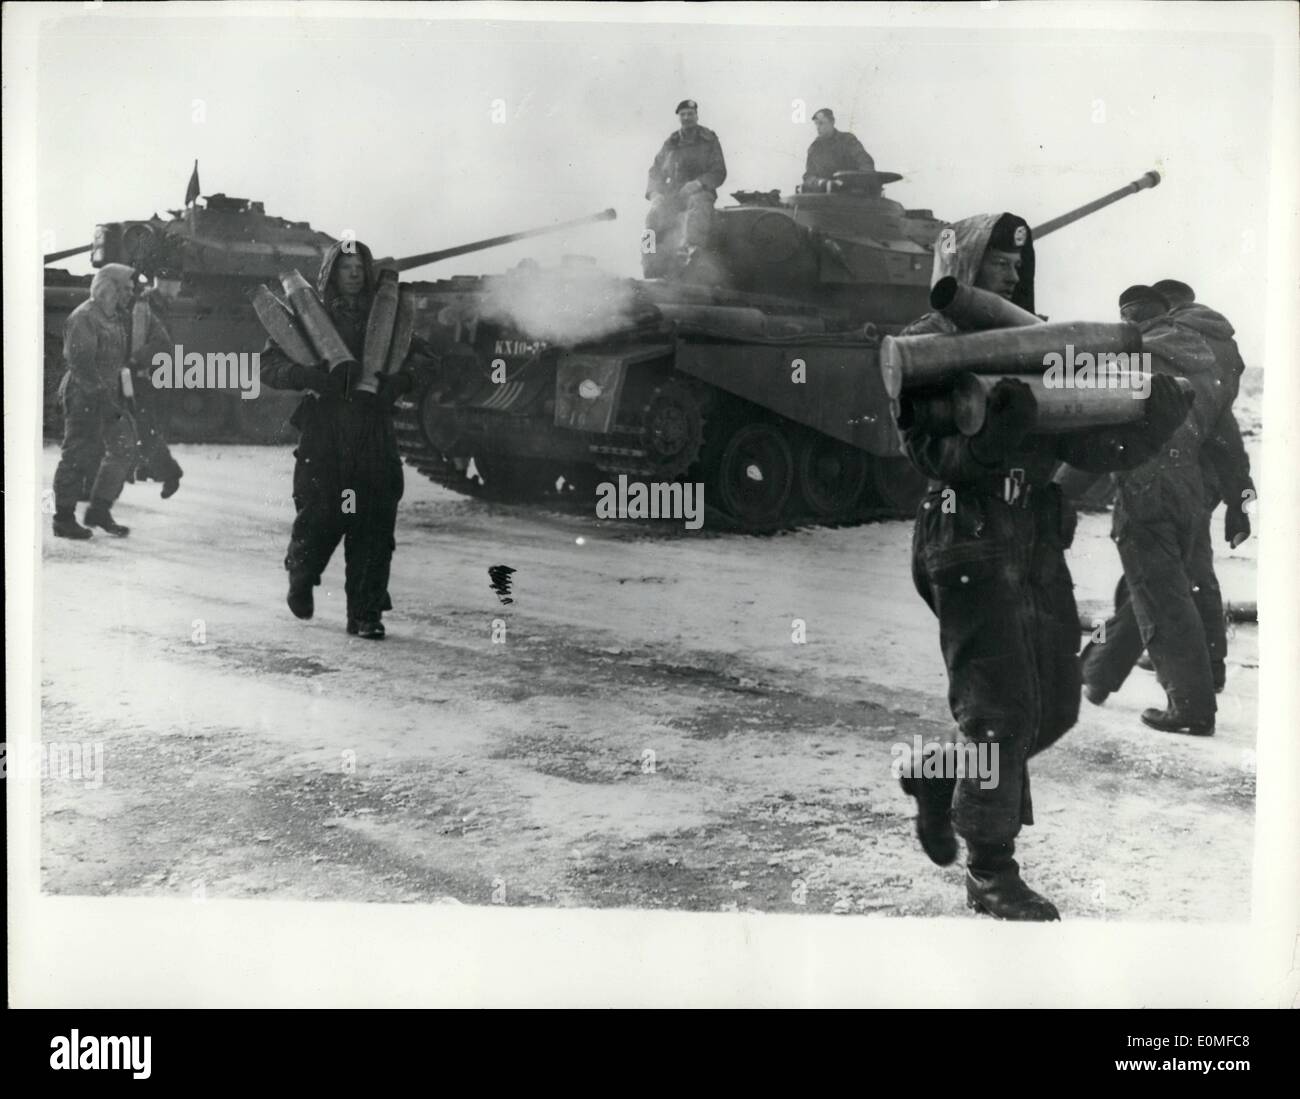 Feb. 05, 1955 - 5-2-55 Tank battalion under training at Belsen-Hohne Germany. The 1st Squadron of the 4th Heavy Tank battalion 1st. Netherlands Corps came from Holland by train for training at the B.A.O.R. Tank Gunnery Range at Belsen-Hohne, Germany recently. They were replaced by another squadron of their battalion. This B.A.O.R. Range is the largest in Europe and is used by armoured units from many N.A.T.O. Nations. Keystone Photo Shows: After firing the expanded shell cases are stacked for return. Stock Photo